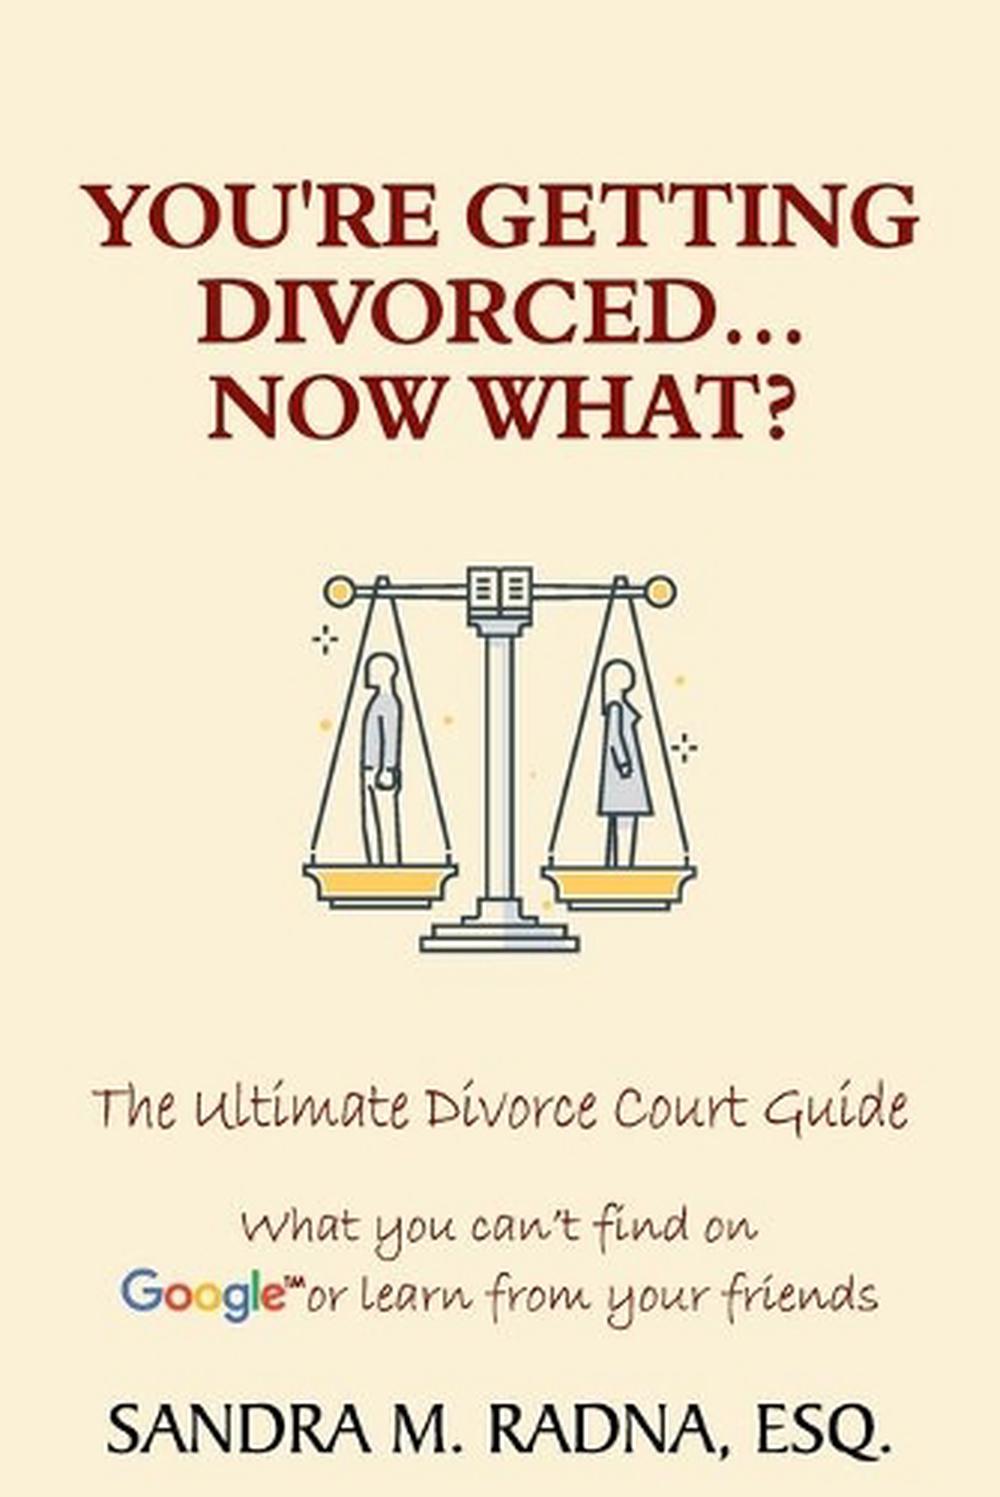 Youre Getting Divorcednow What The Ultimate Divorce Court Guide